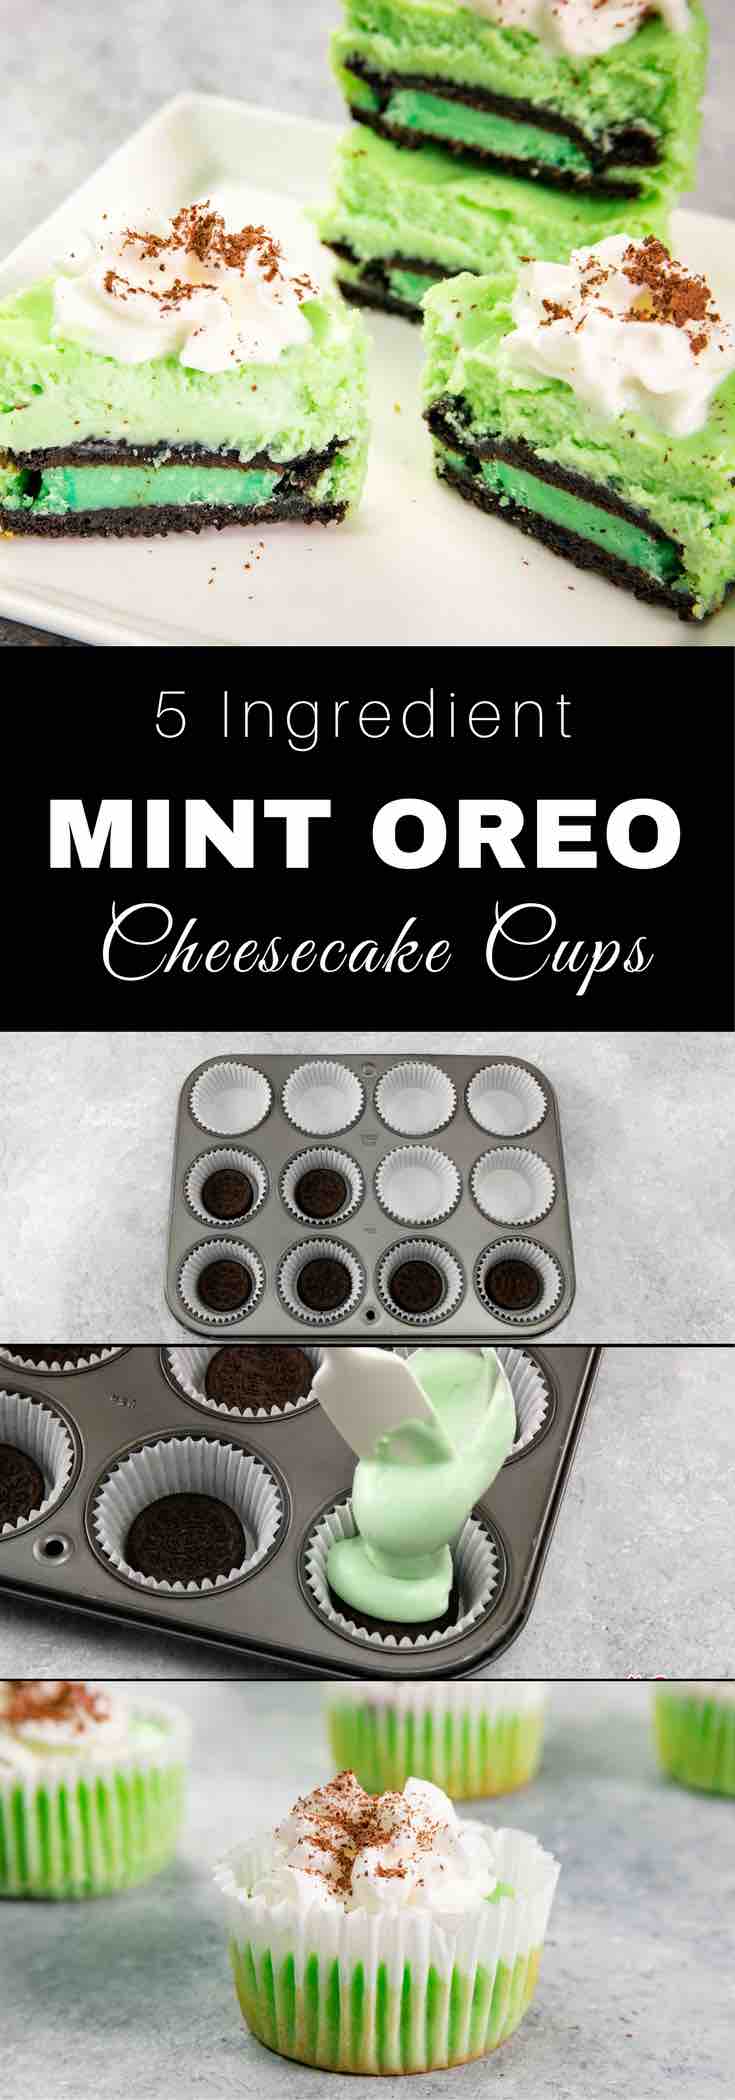 Mini Mint Oreo Cheesecake Cupcakes – Absolutely delicious and super easy to make with only 5 ingredients: mint Oreos, cream cheese, sugar, eggs and crème de menthe. Mint Oreo crust topped with a smooth and creamy cheesecake filling. The perfect quick and easy spring dessert recipe that everyone will LOVE! Video recipe.